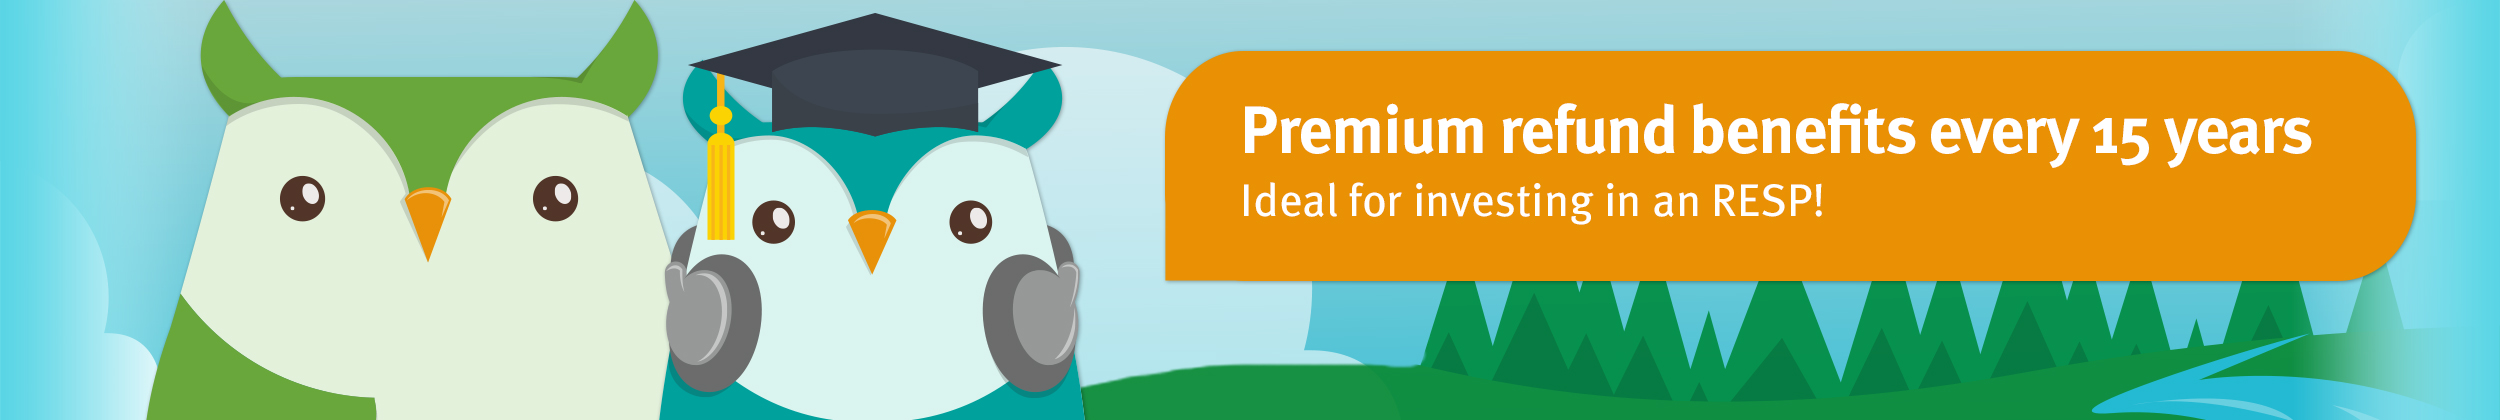 Premium refund benefits every 15 years - Ideal for investing in an RESP